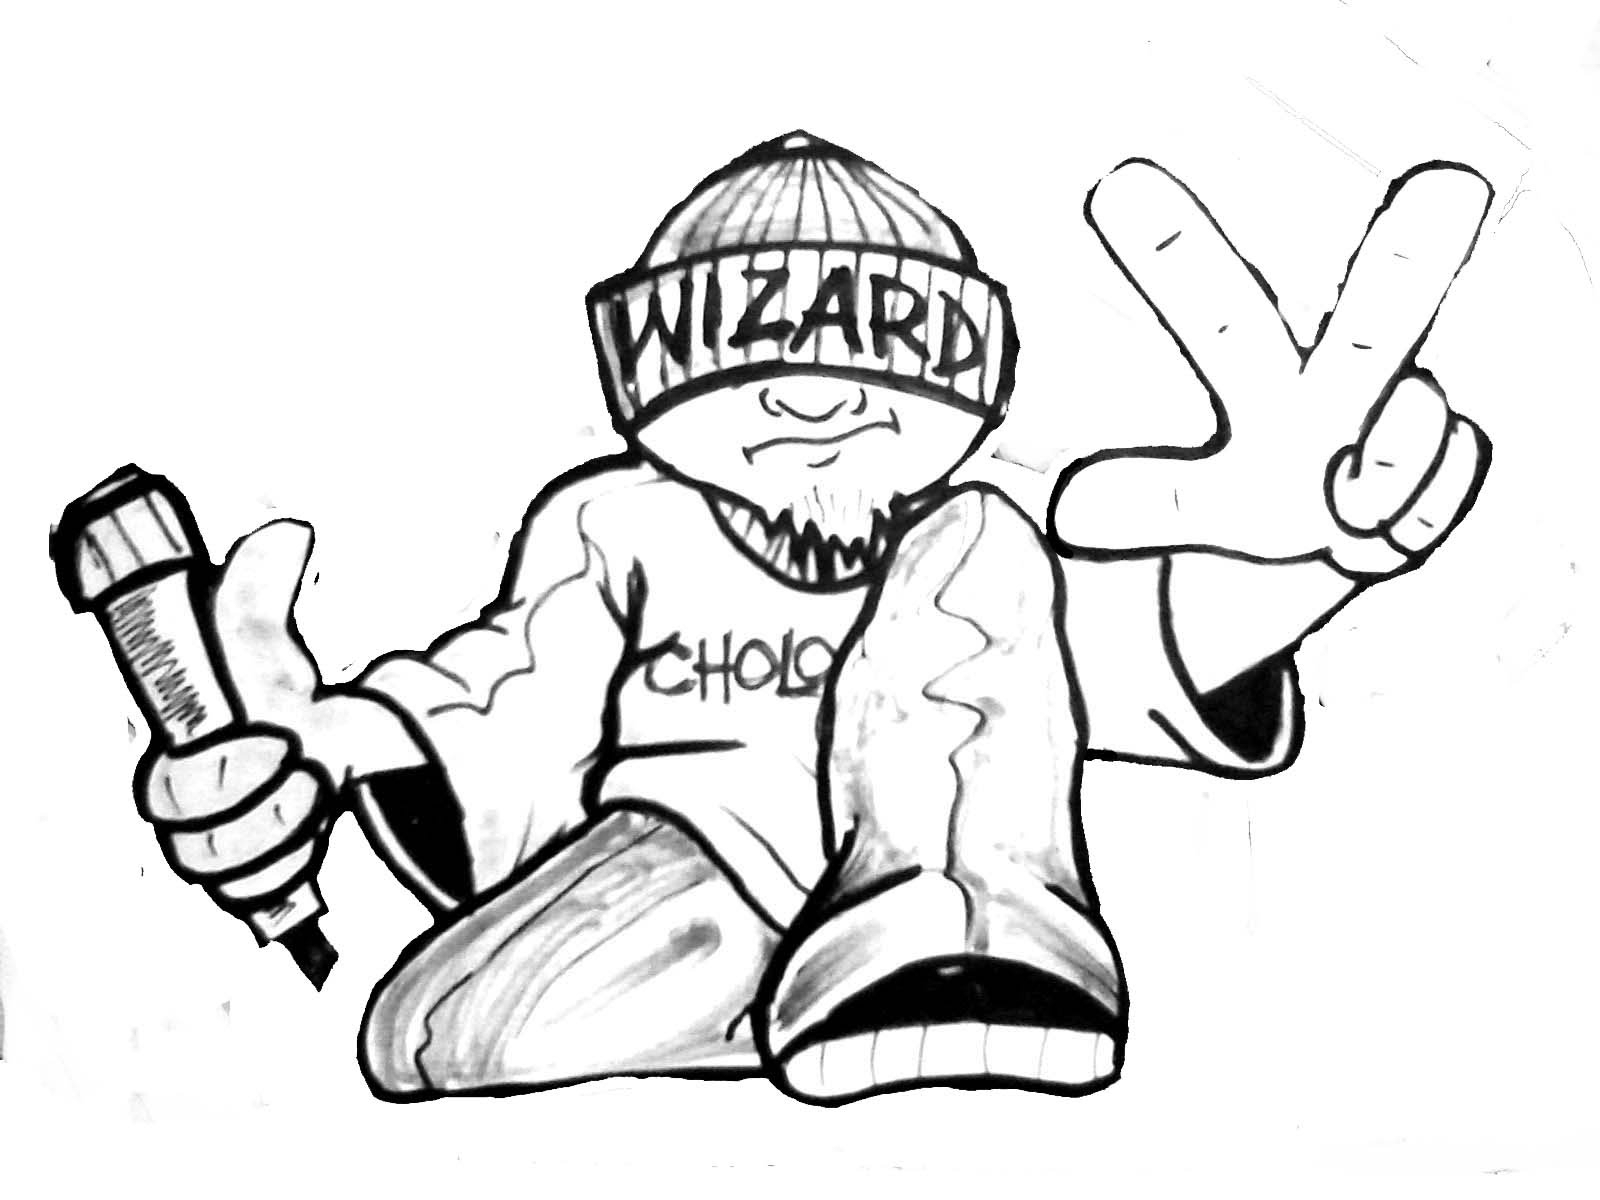 Wizard Drawings Graffiti At PaintingValleycom Explore Collection Of.